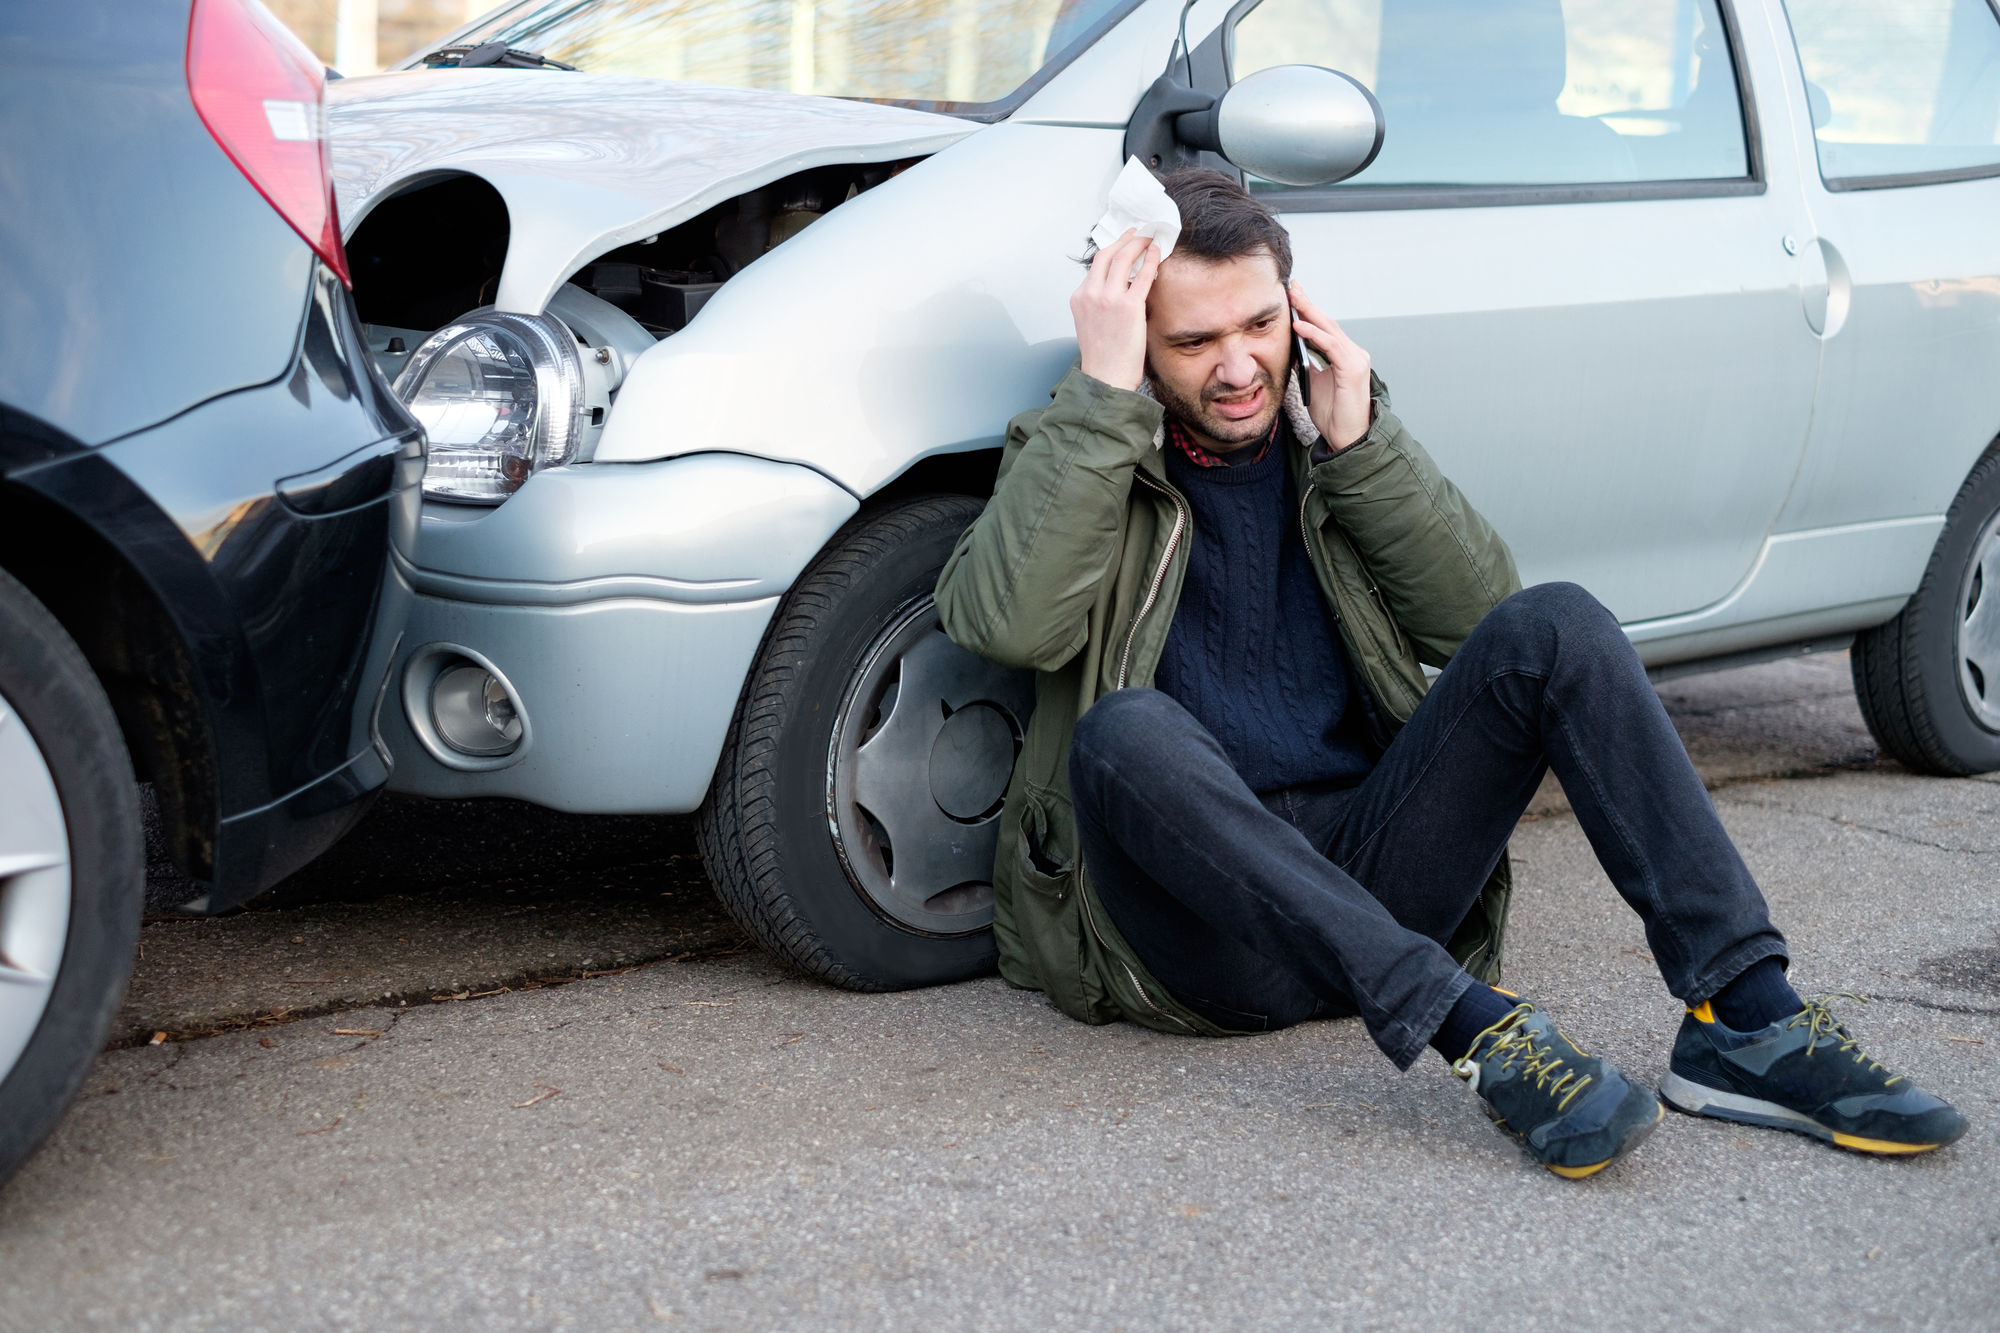 Call Our Lawyers After An Auto Accident